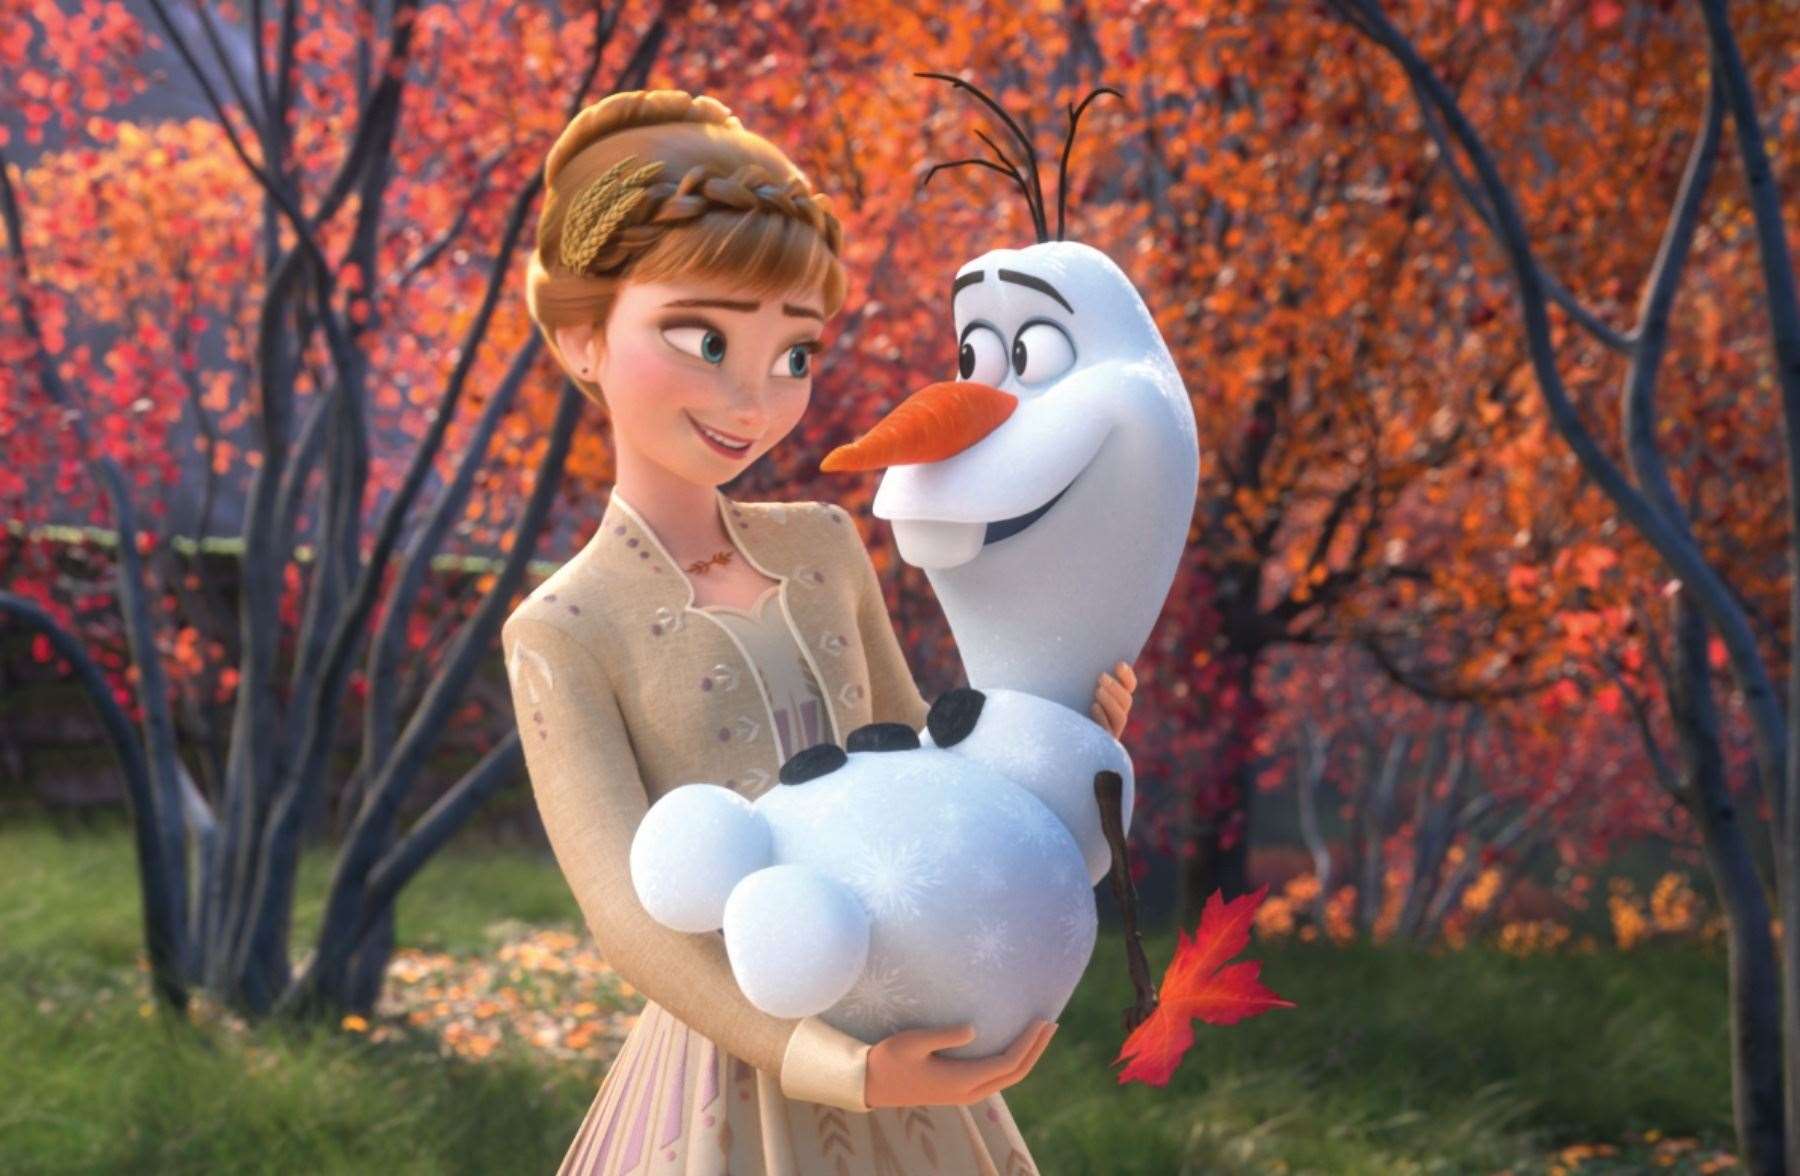 Frozen character Olaf also found his name among the list of car nicknames